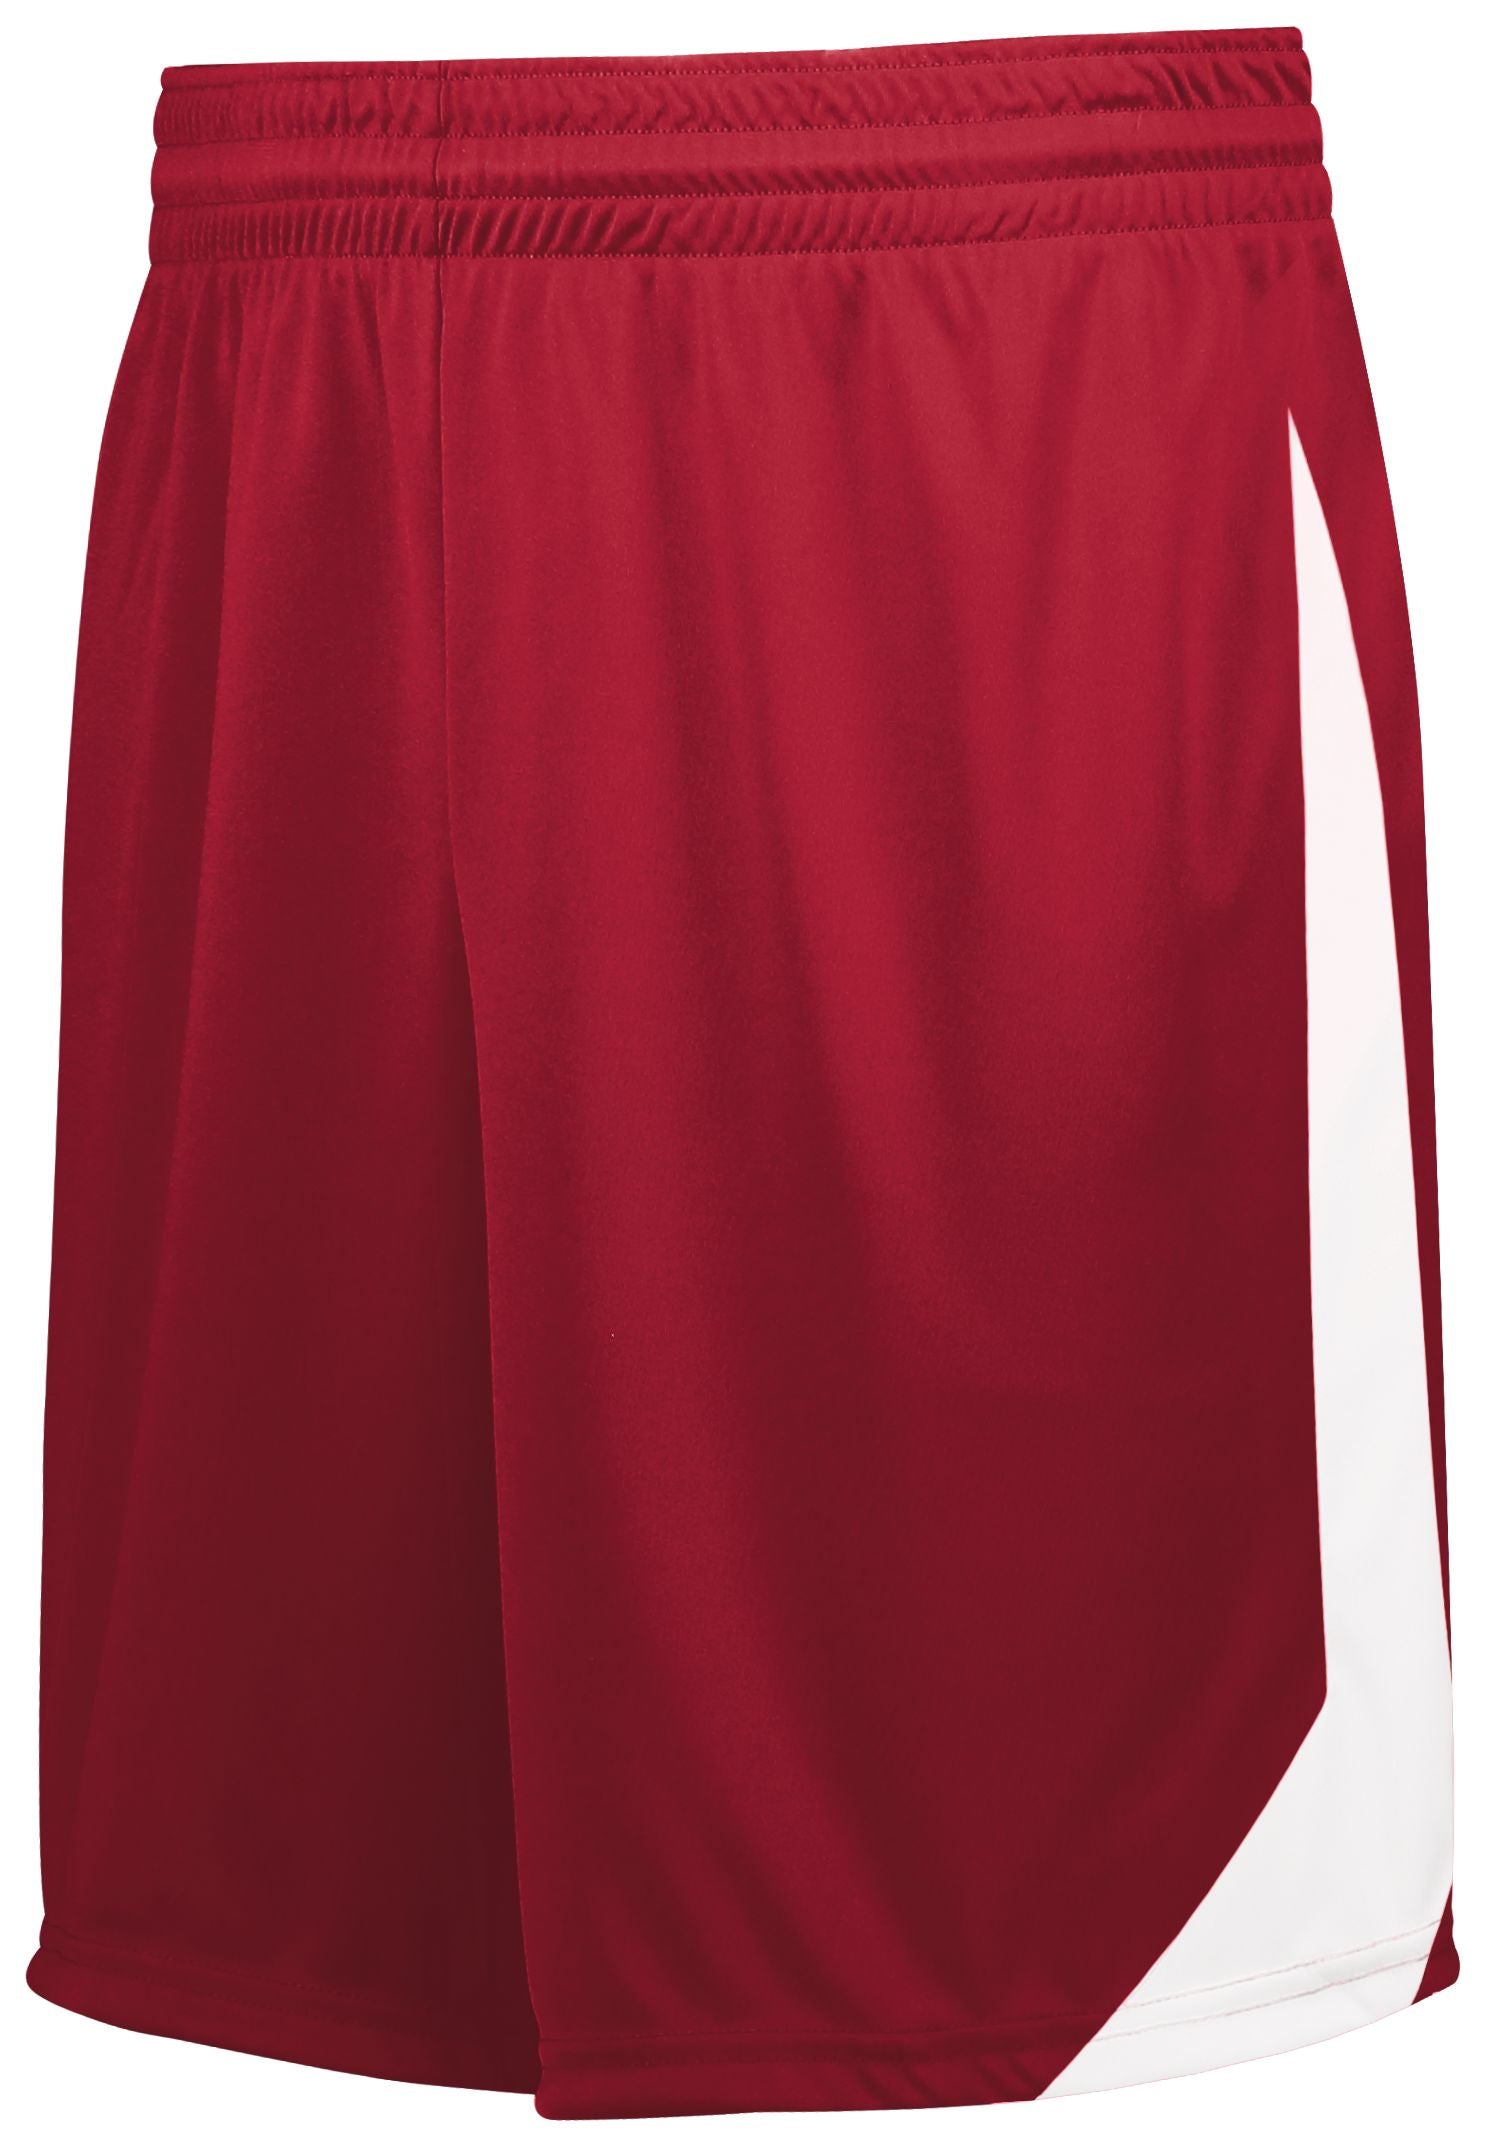 High 5 Athletico Shorts in Scarlet/White  -Part of the Adult, Adult-Shorts, High5-Products, Soccer, All-Sports-1 product lines at KanaleyCreations.com